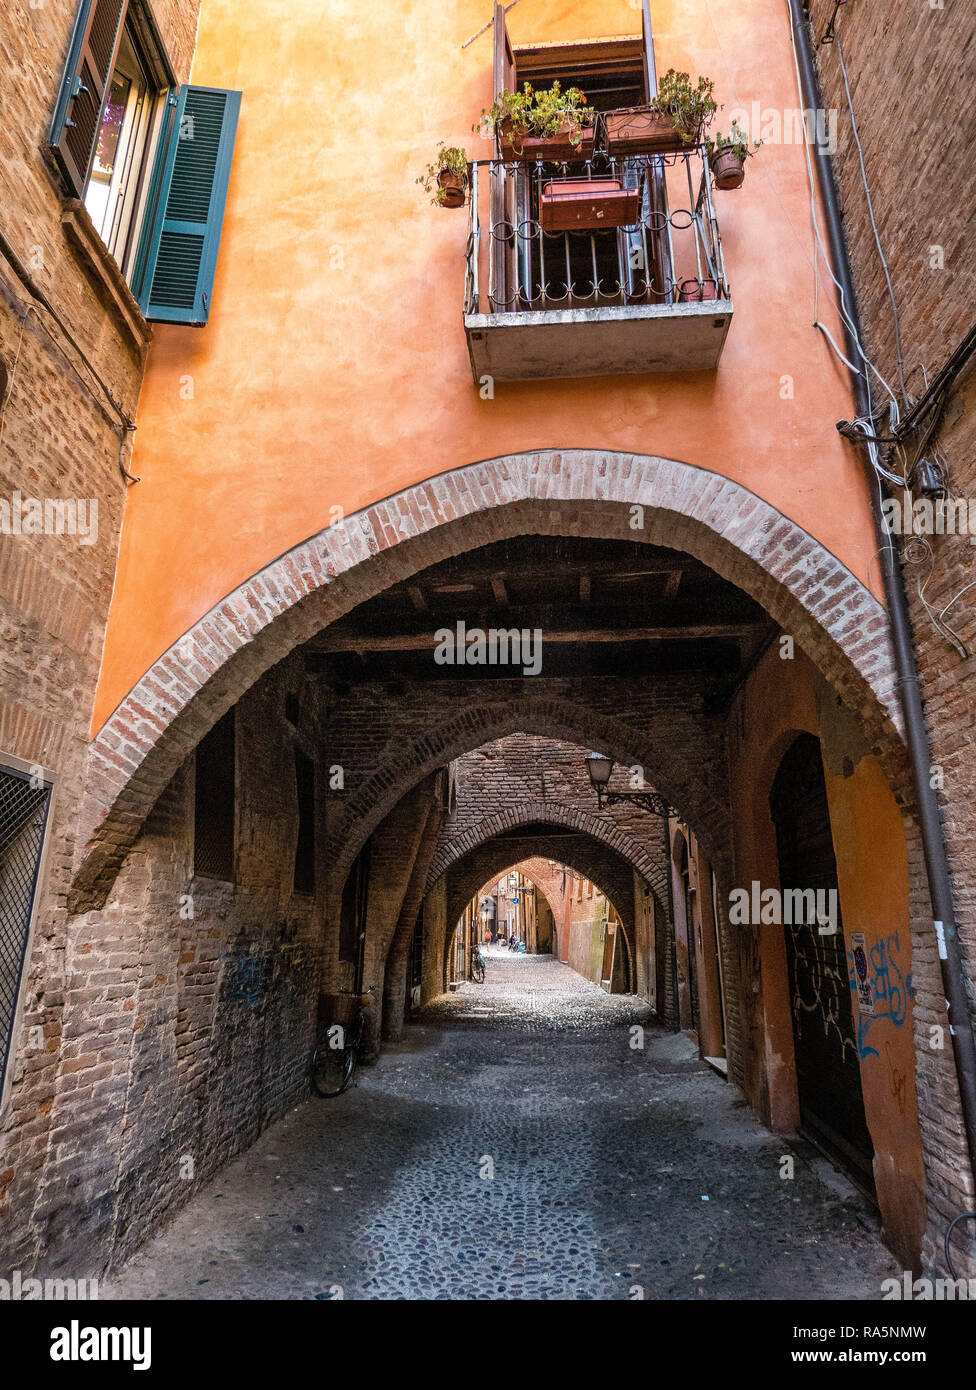 Narrow streets and arches in the medieval town of Ferrara, Italy Stock Photo